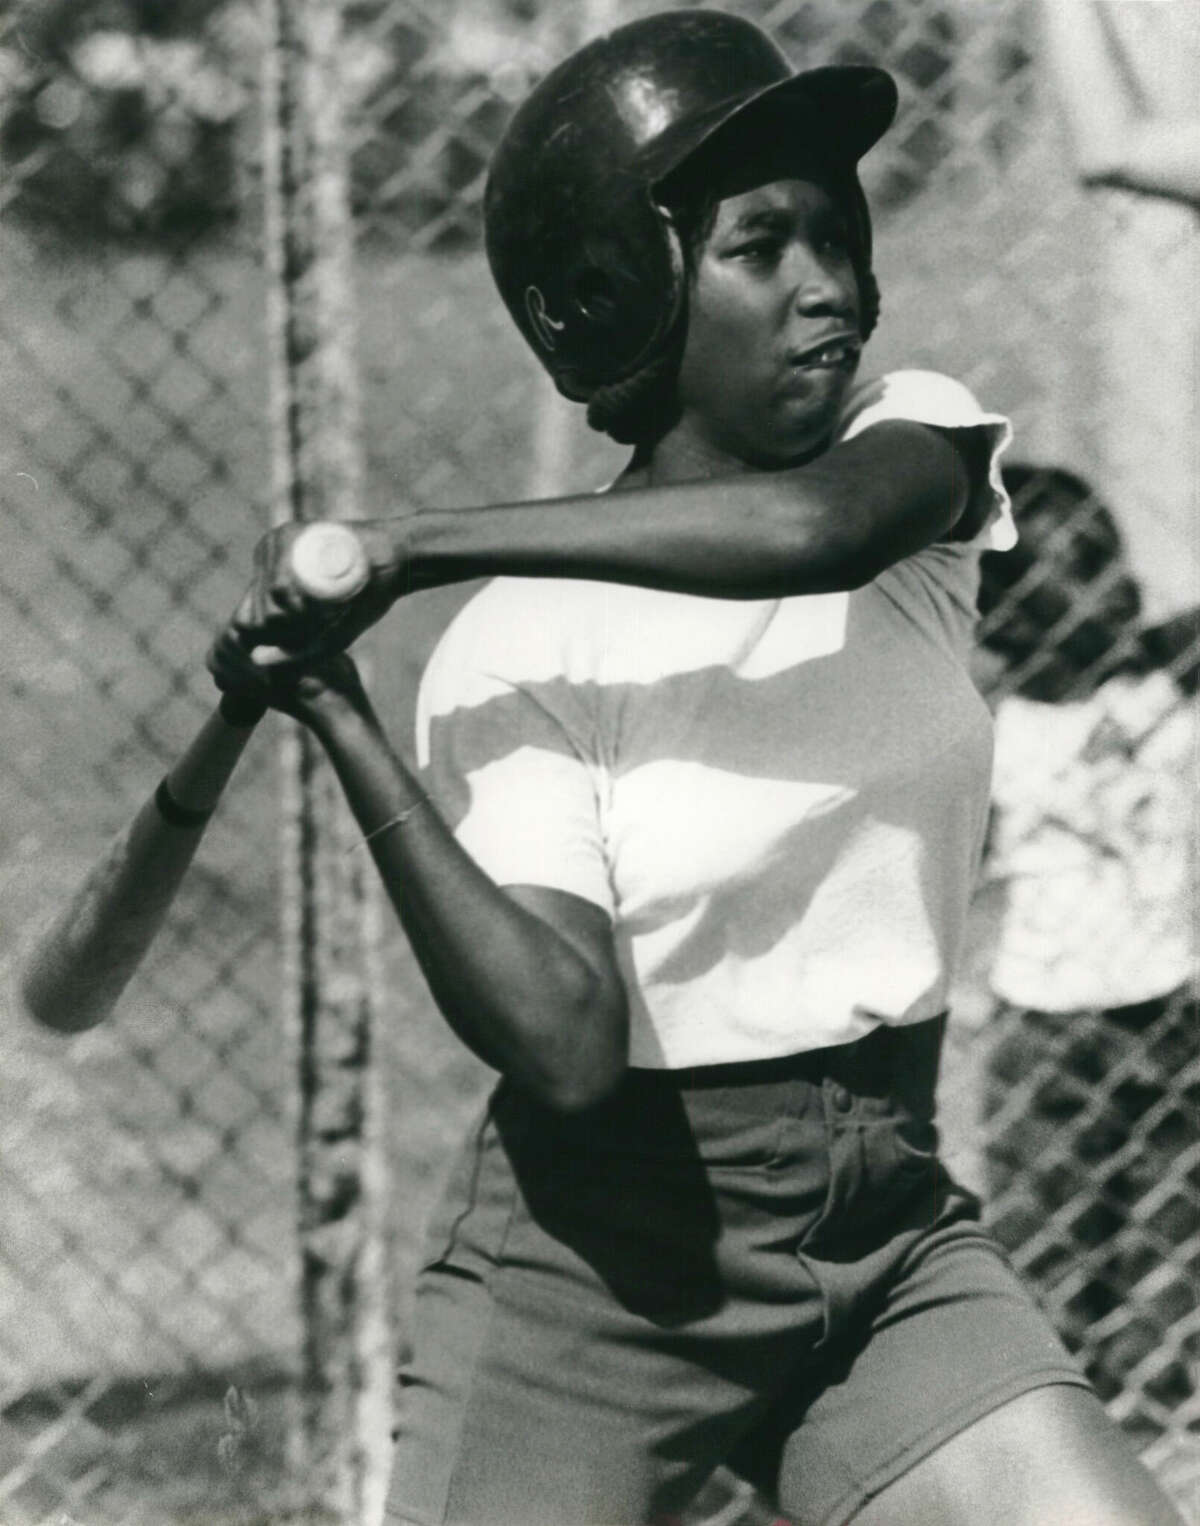 03/28/1978 - Outfielder Linda Williams practices with the Wheatley High School baseball team after she won a ruling in federal court allowing her to play on the team. Williams is the first female to successfully challenge the University Scholastic League for the right to play on a male high school athletic team.